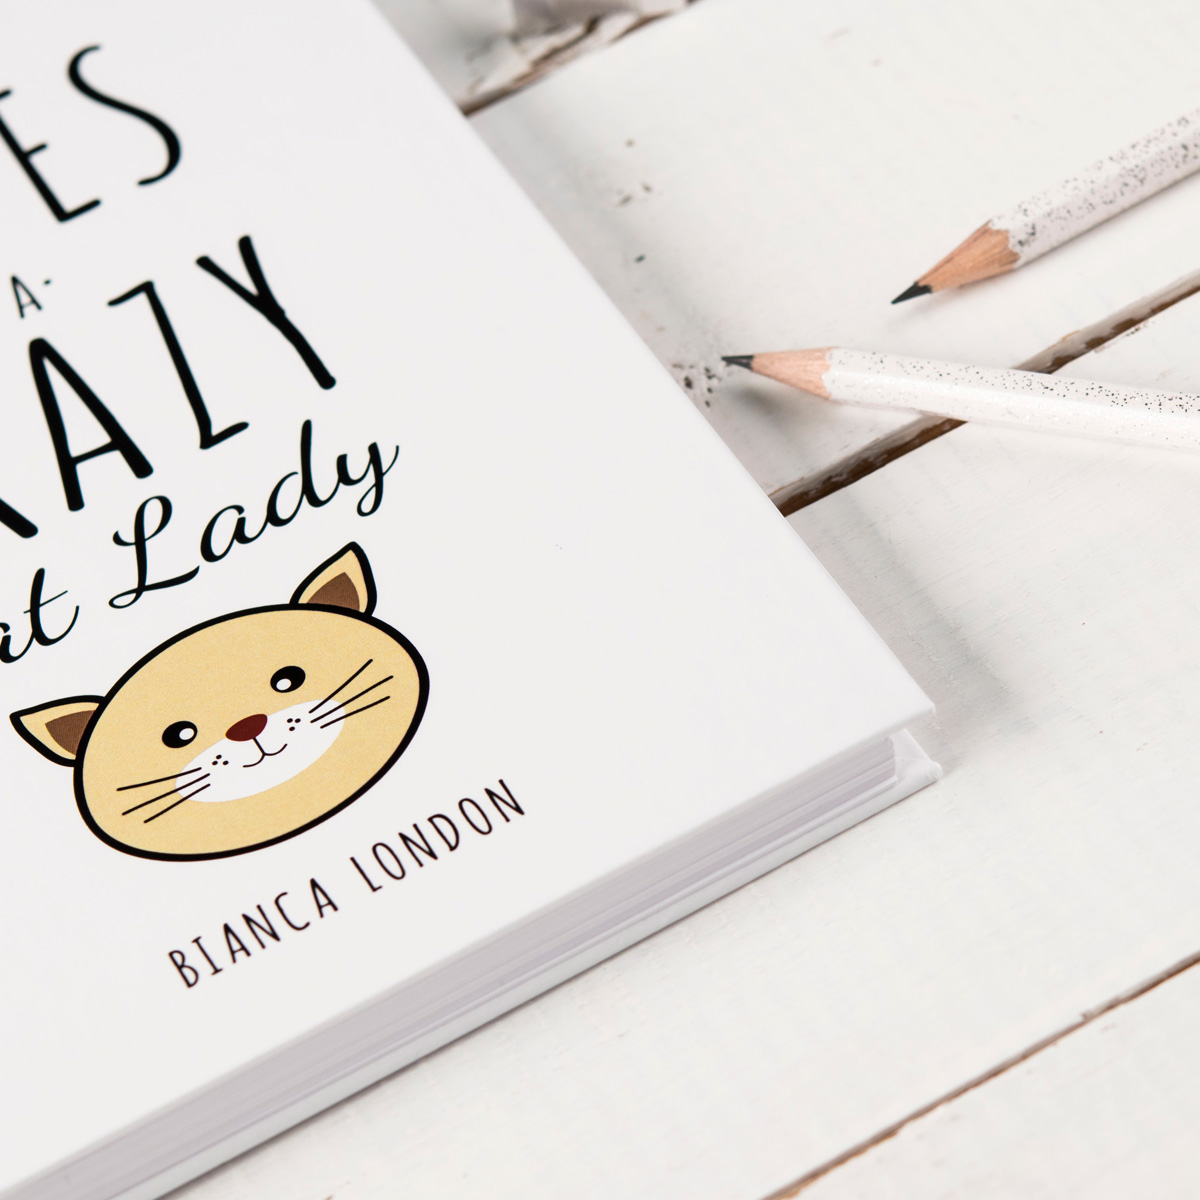 Personalised Notebook - Notes Of A Crazy Cat Lady